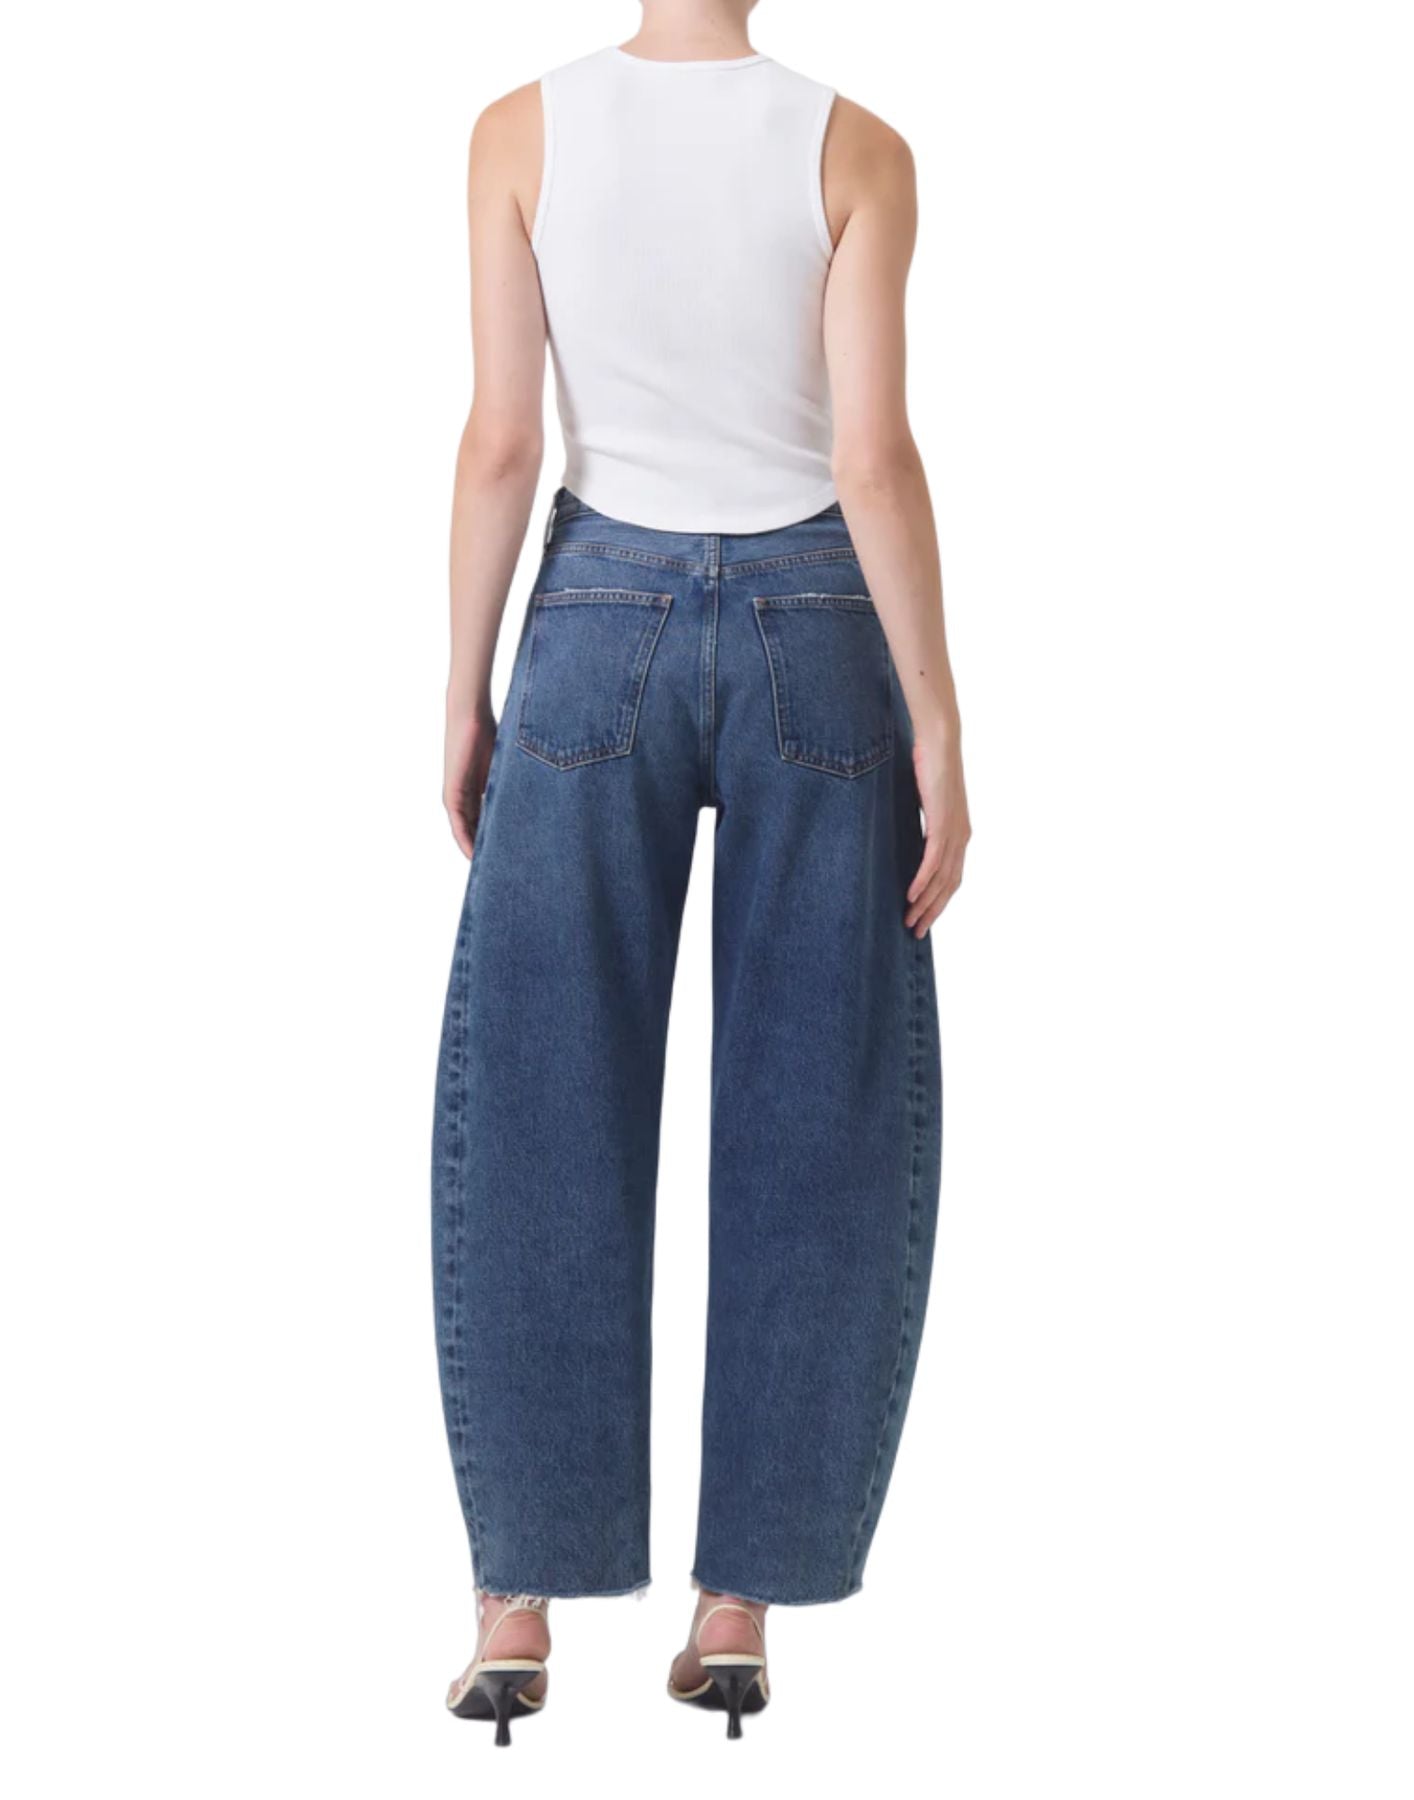 Jeans woman A9039 1206 CONTROL Agolde